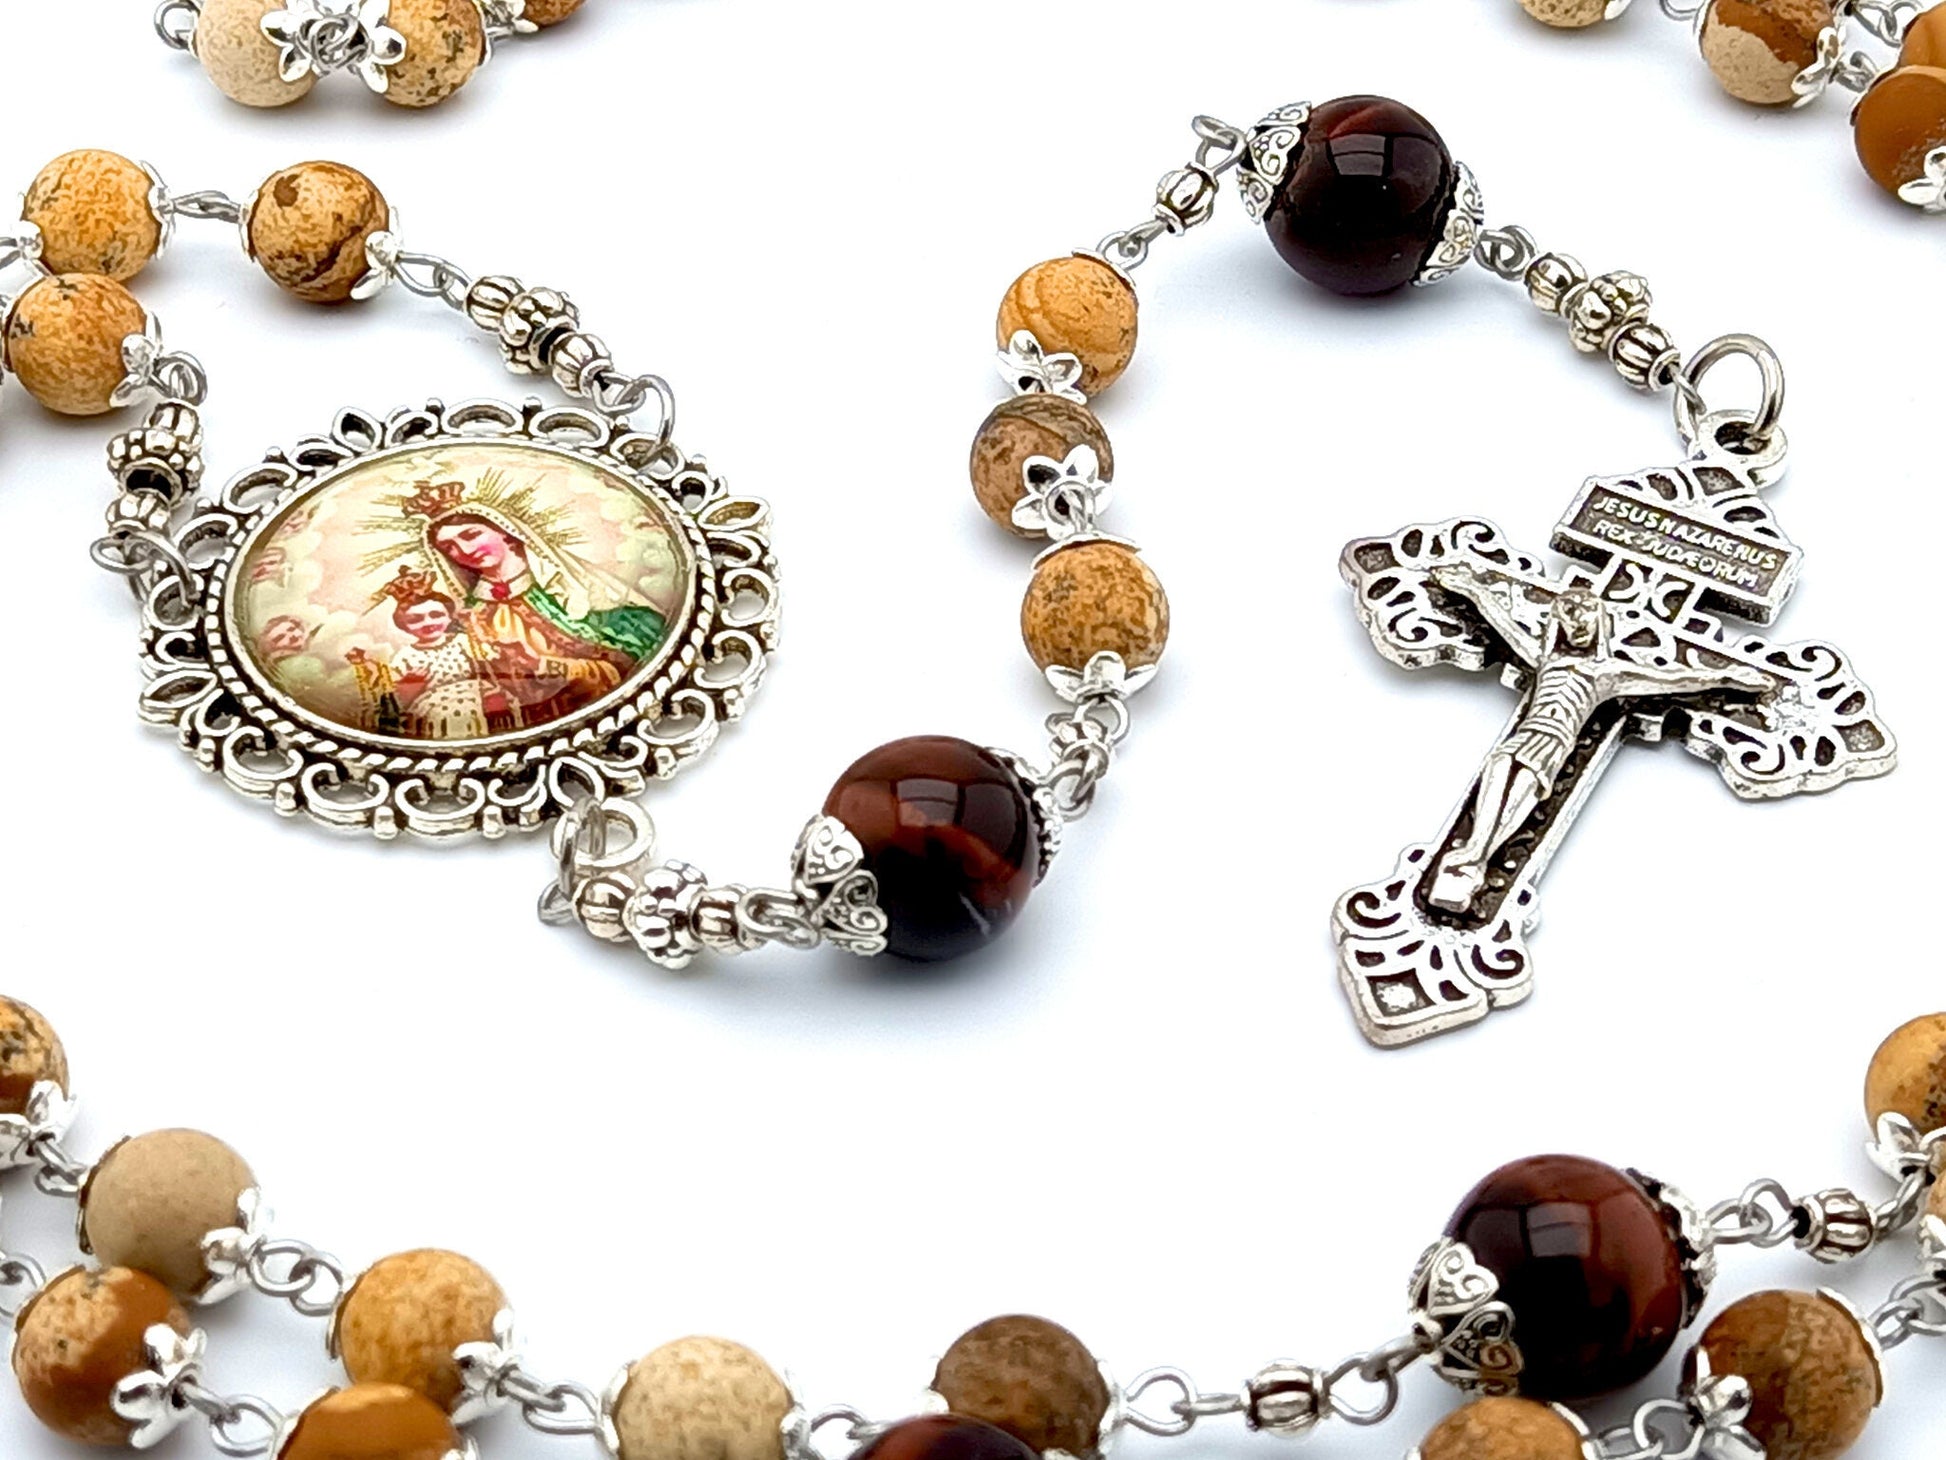 Our Lady of Mount Carmel unique rosary beads with natural gemstone and tigers eye beads, silver pardon crucifix and picture centre medal.